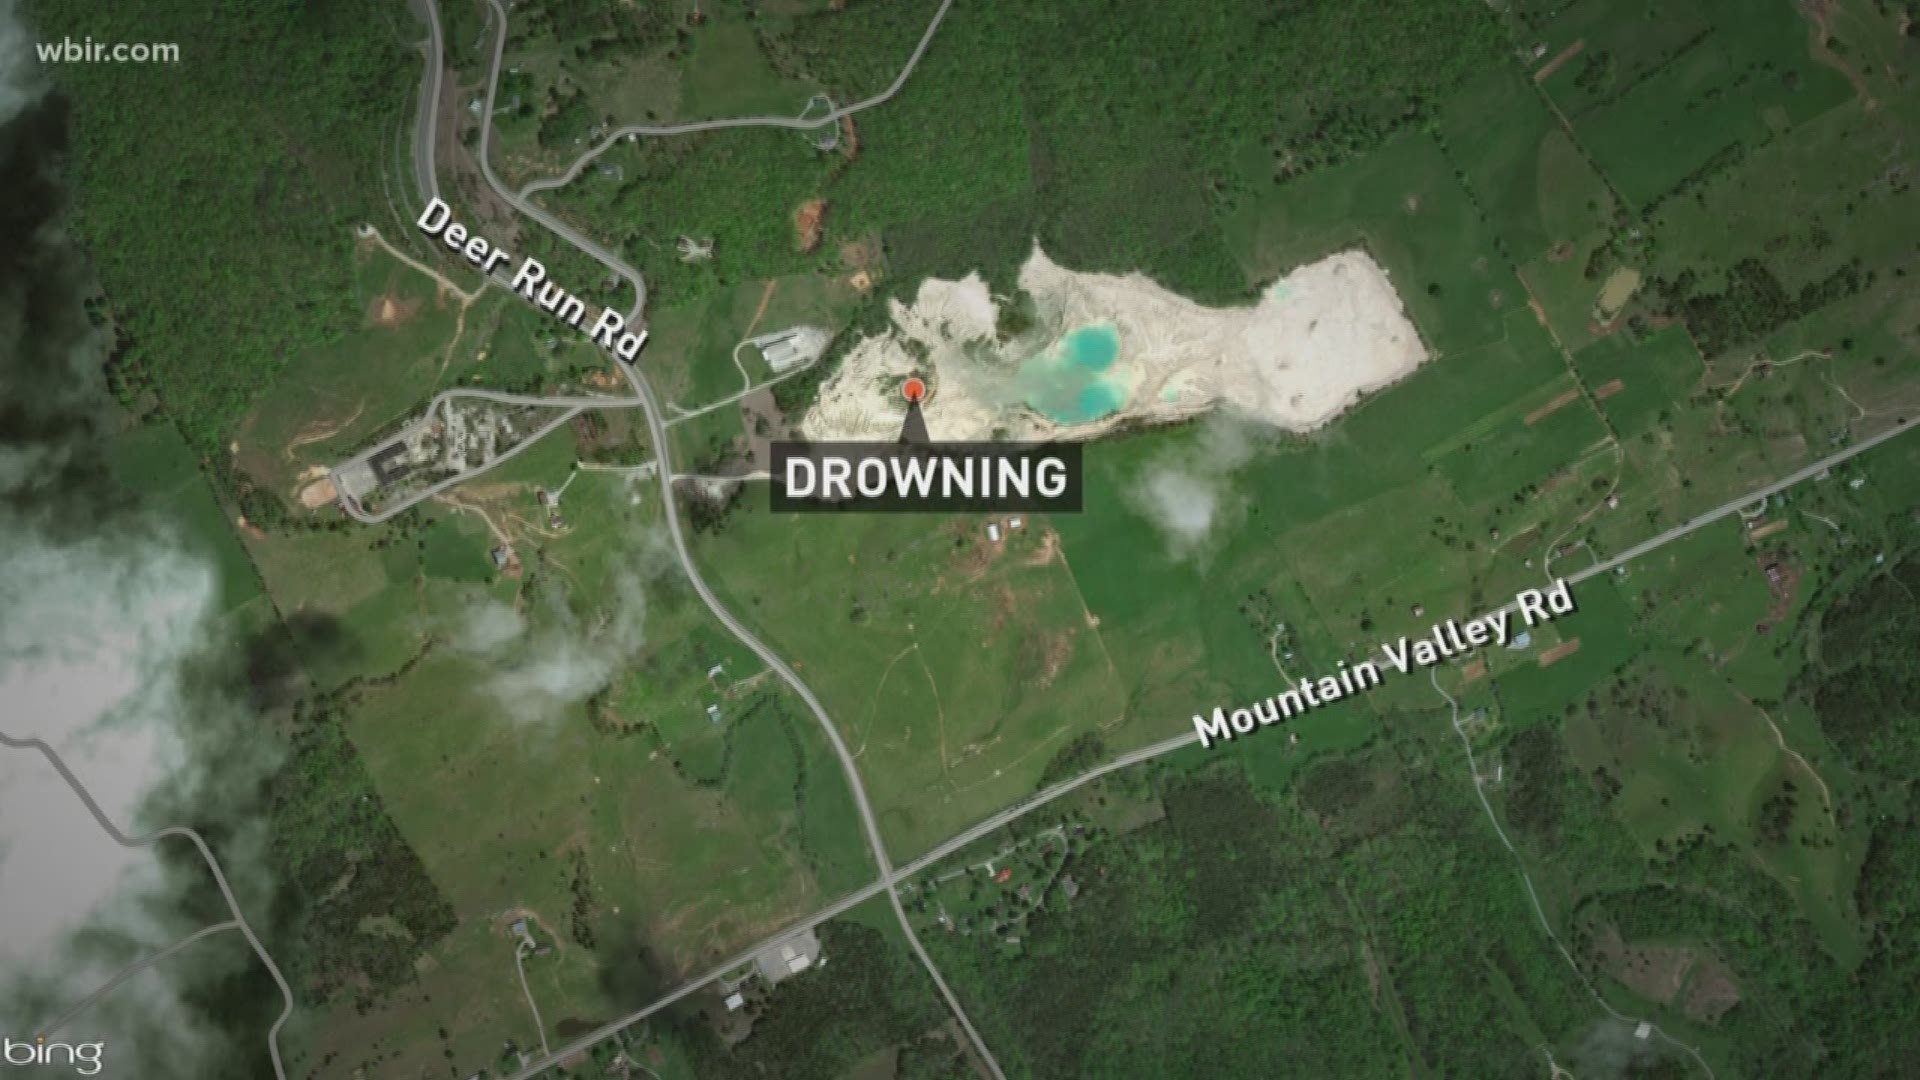 One teen is dead after drowning in Hancock County.